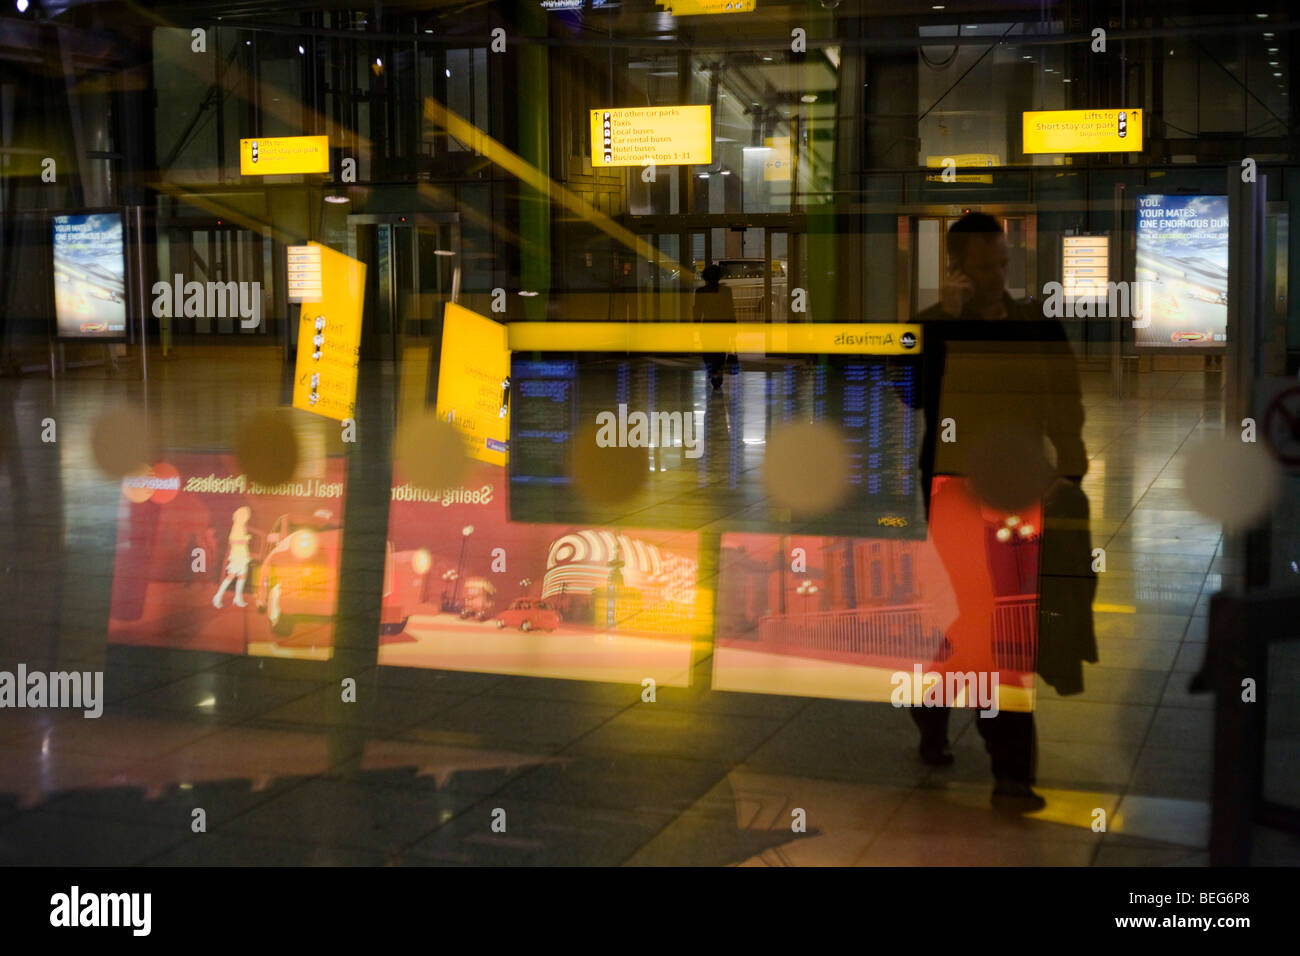 Evening sign and architecture atmosphere seen through large window glass at Heathrow's terminal 5. Stock Photo